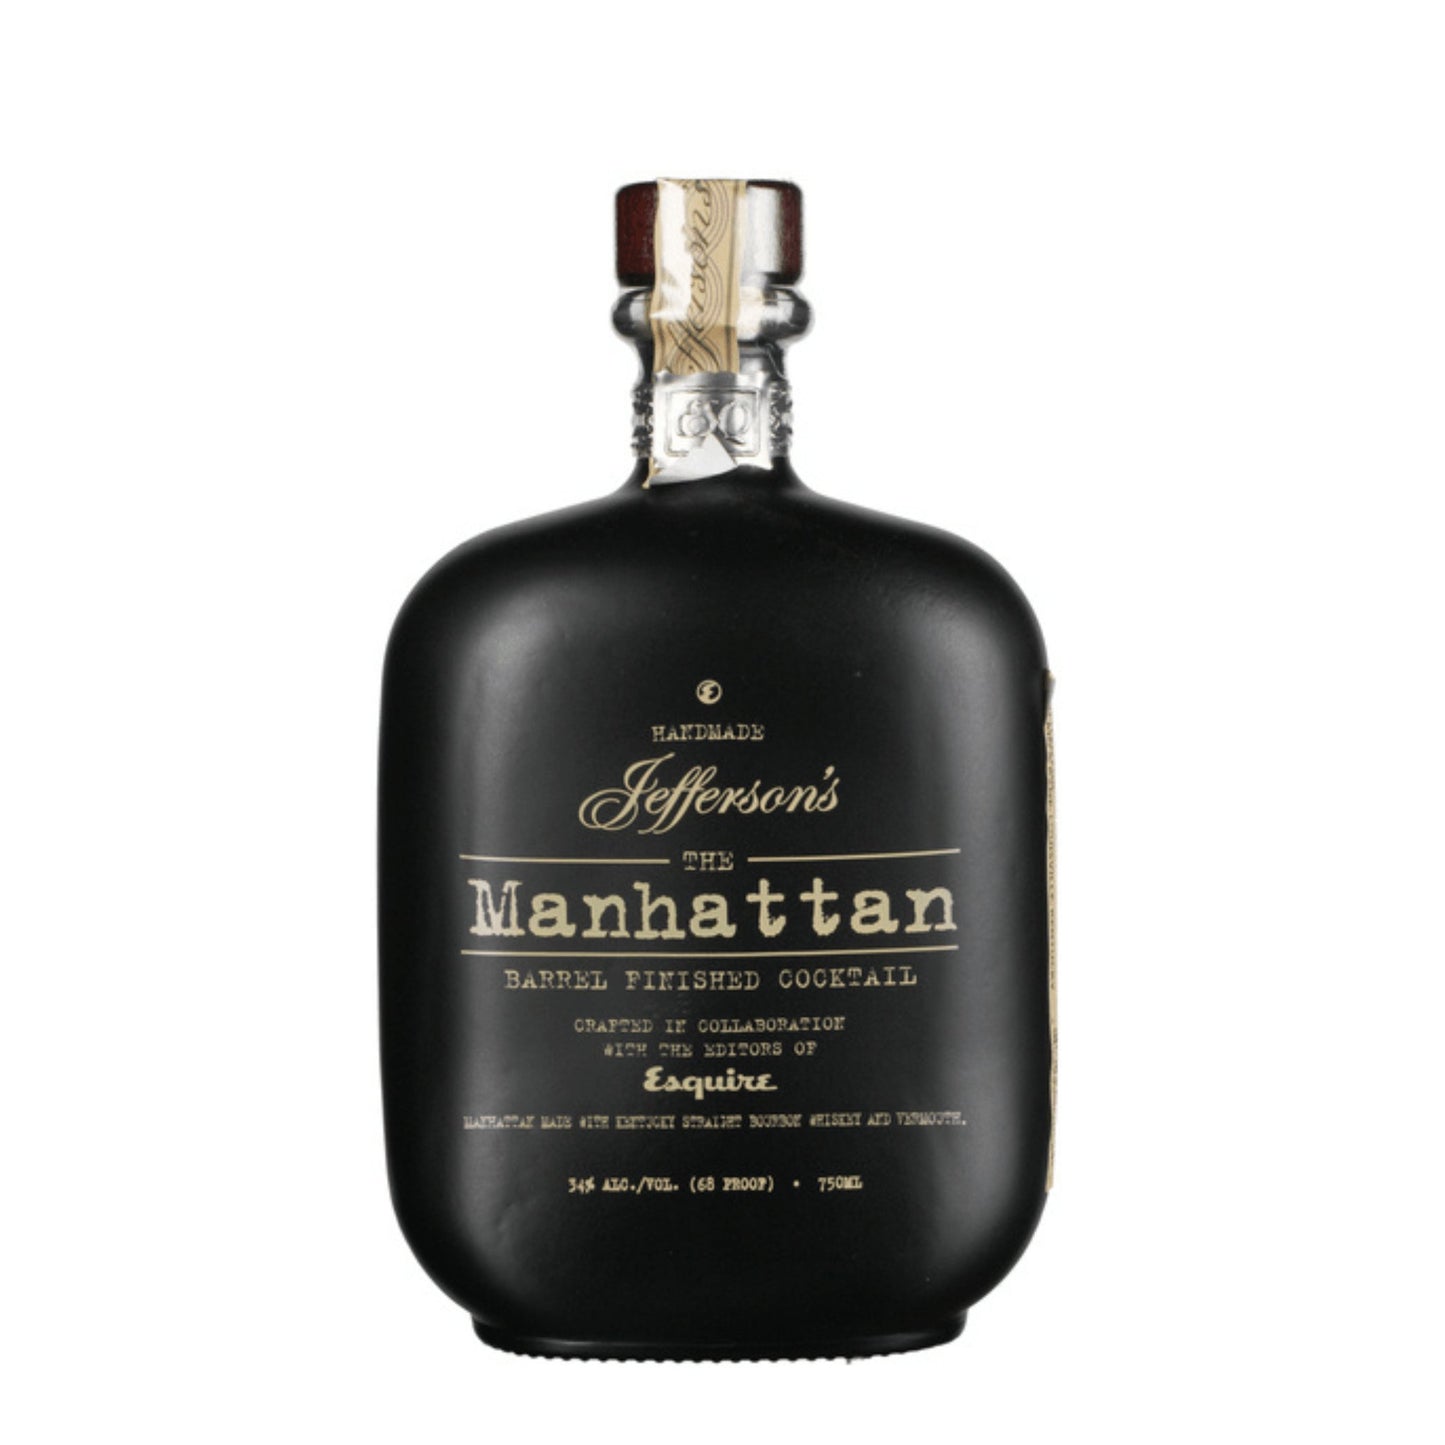 Jefferson's The Manhattan Barrel Finished Cocktail American Whiskey 750mL - Booze House